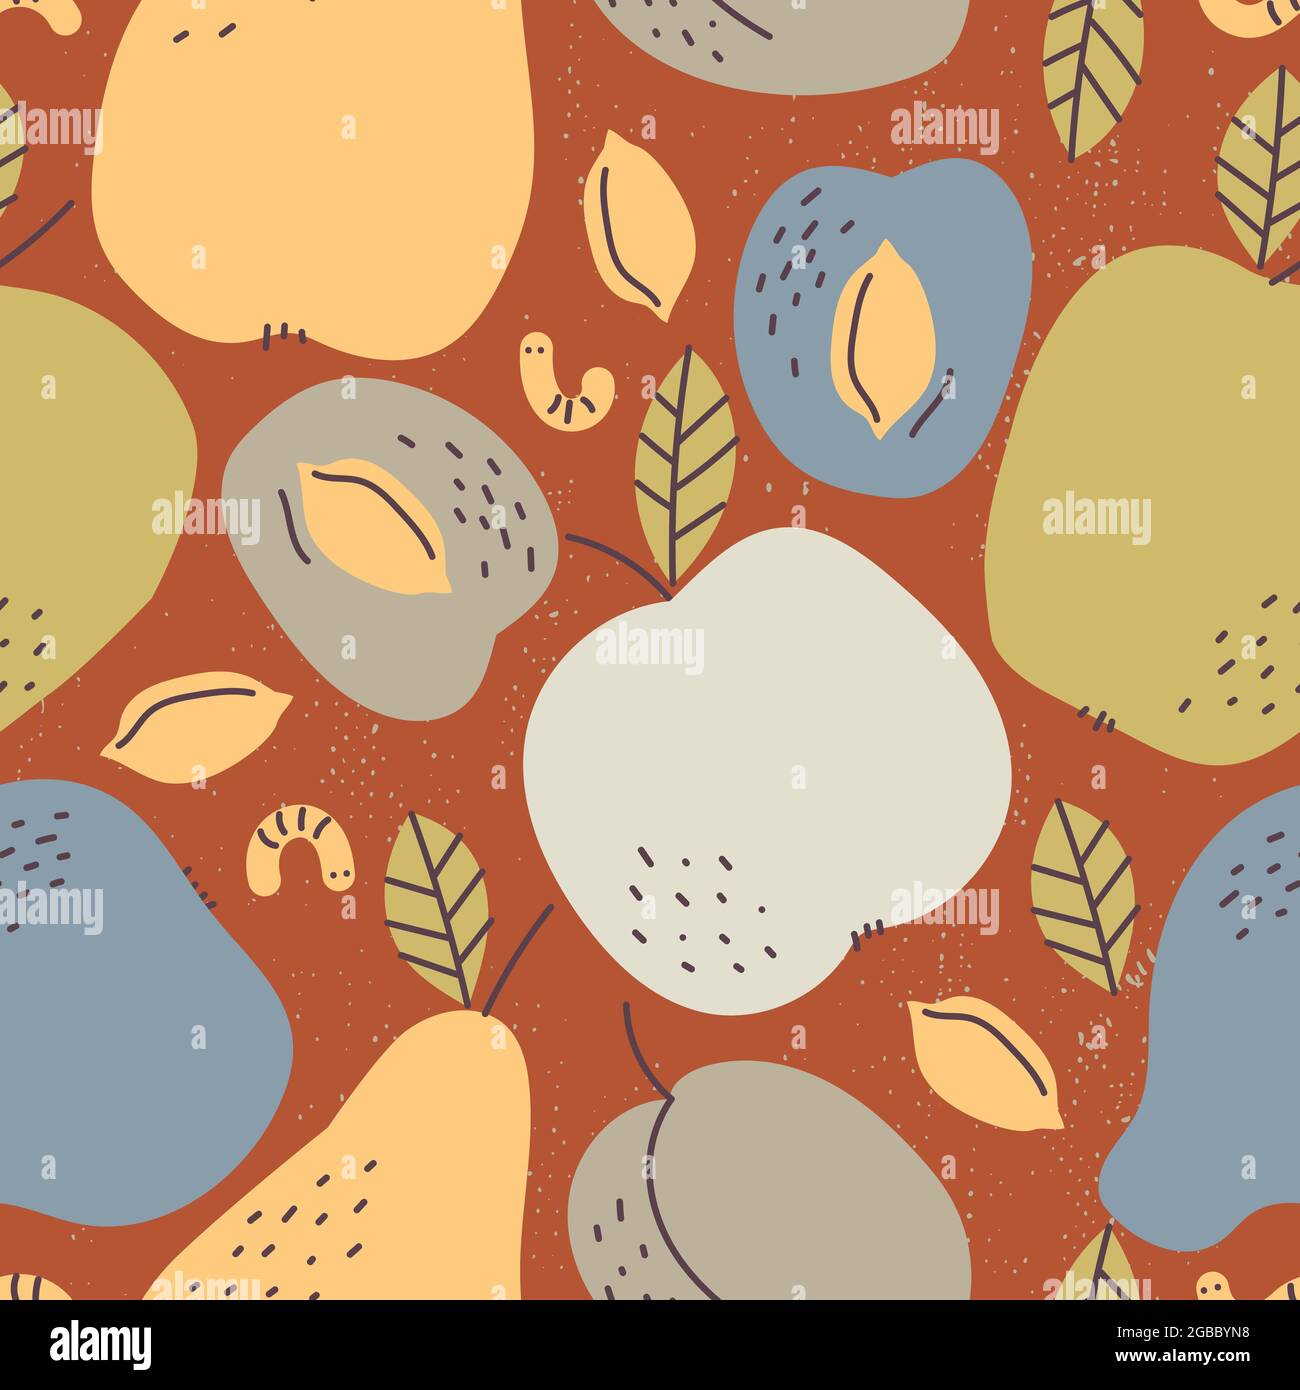 Seamless retro pattern. Autumn harvest of fruits apples, pears, plums, earthy colors. Stock Vector